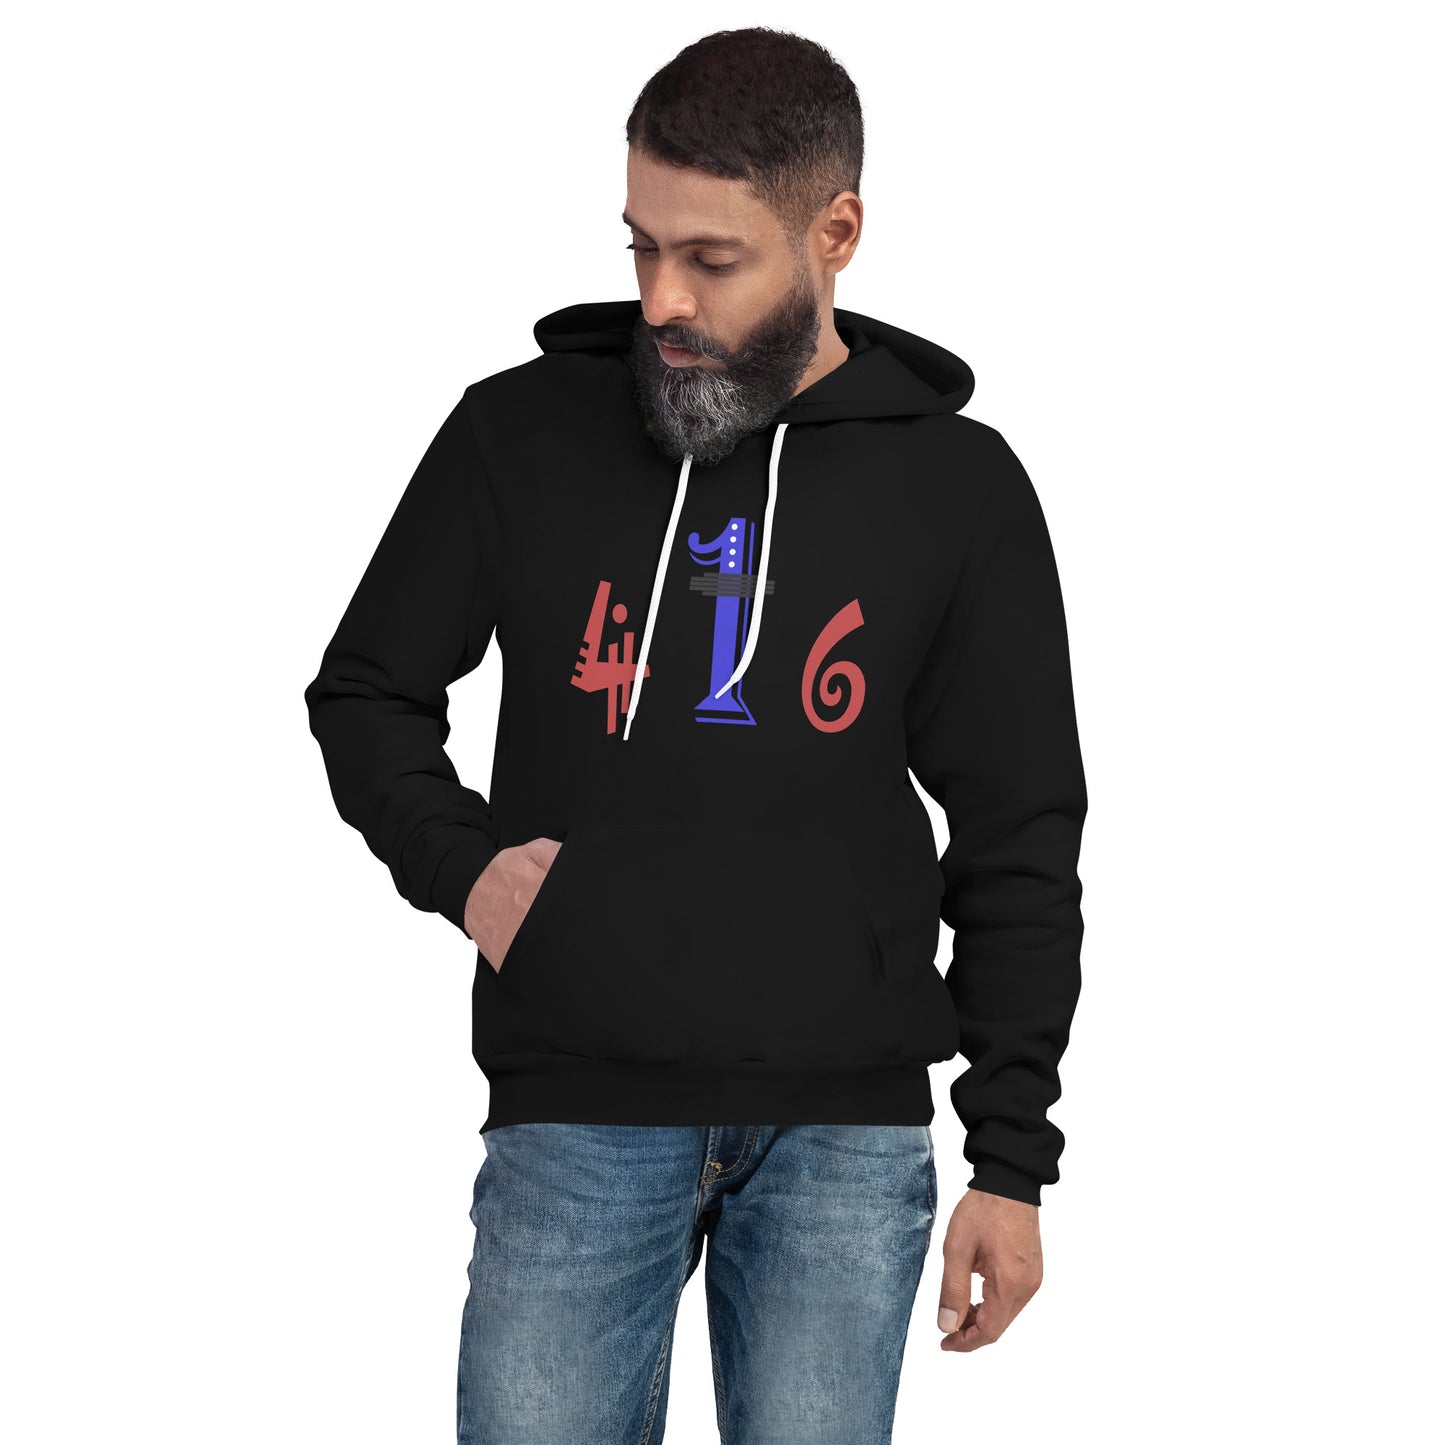 Four One SIX - soft light and comfy unisex hoodie